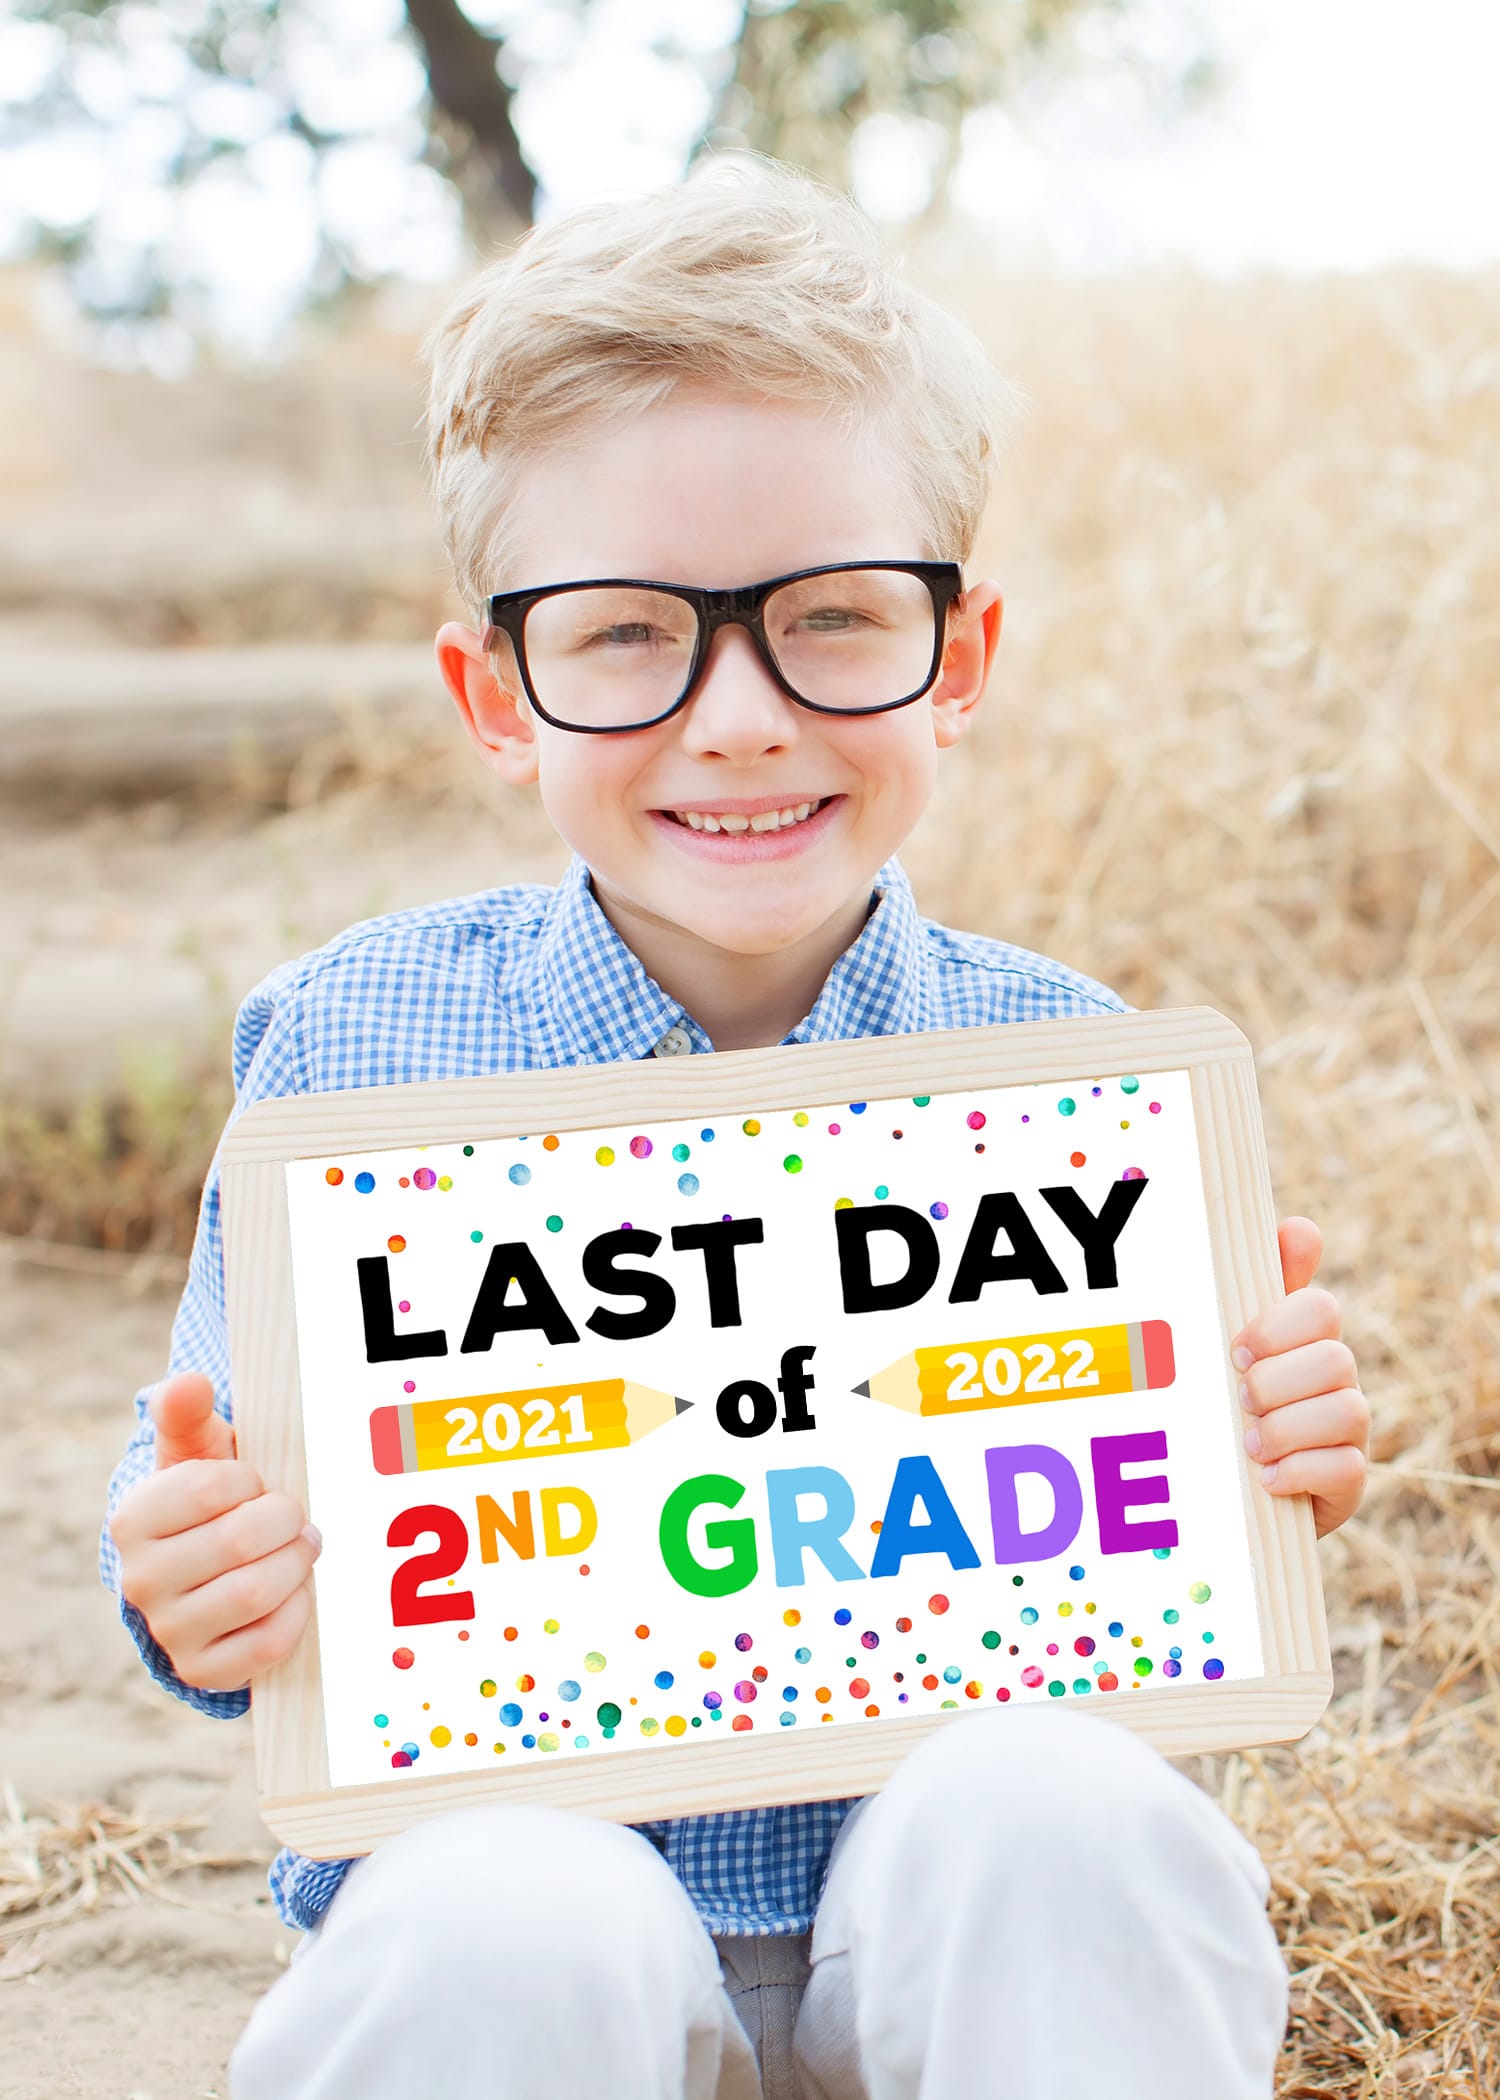 Blonde boy with glasses holding a Last Day of School sign